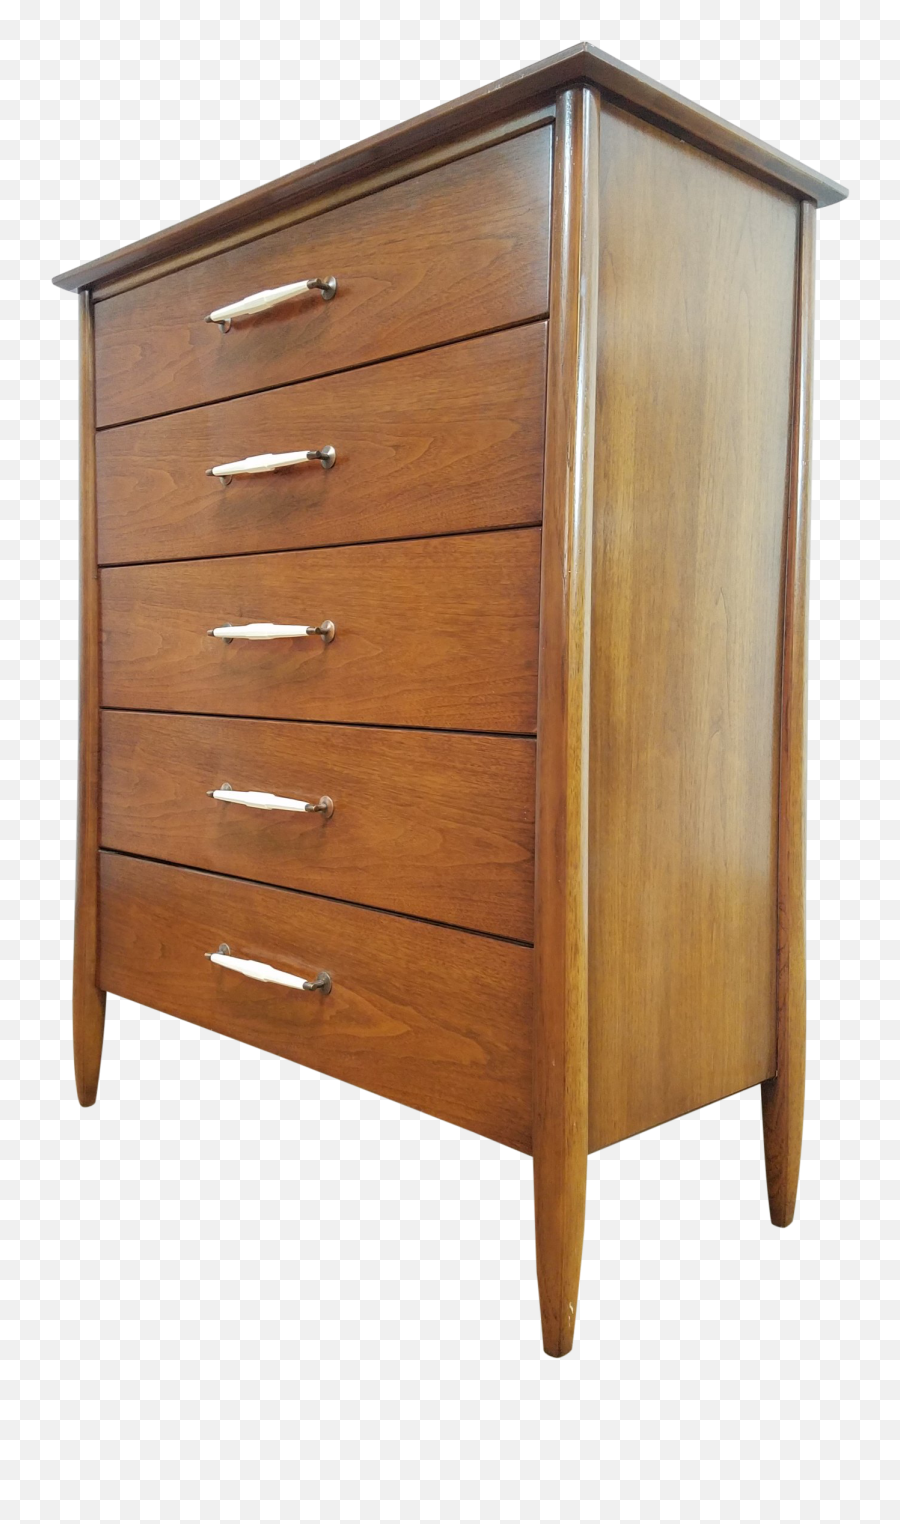 Tall Dresser Free Png Image - Portable Network Graphics,Dresser Png